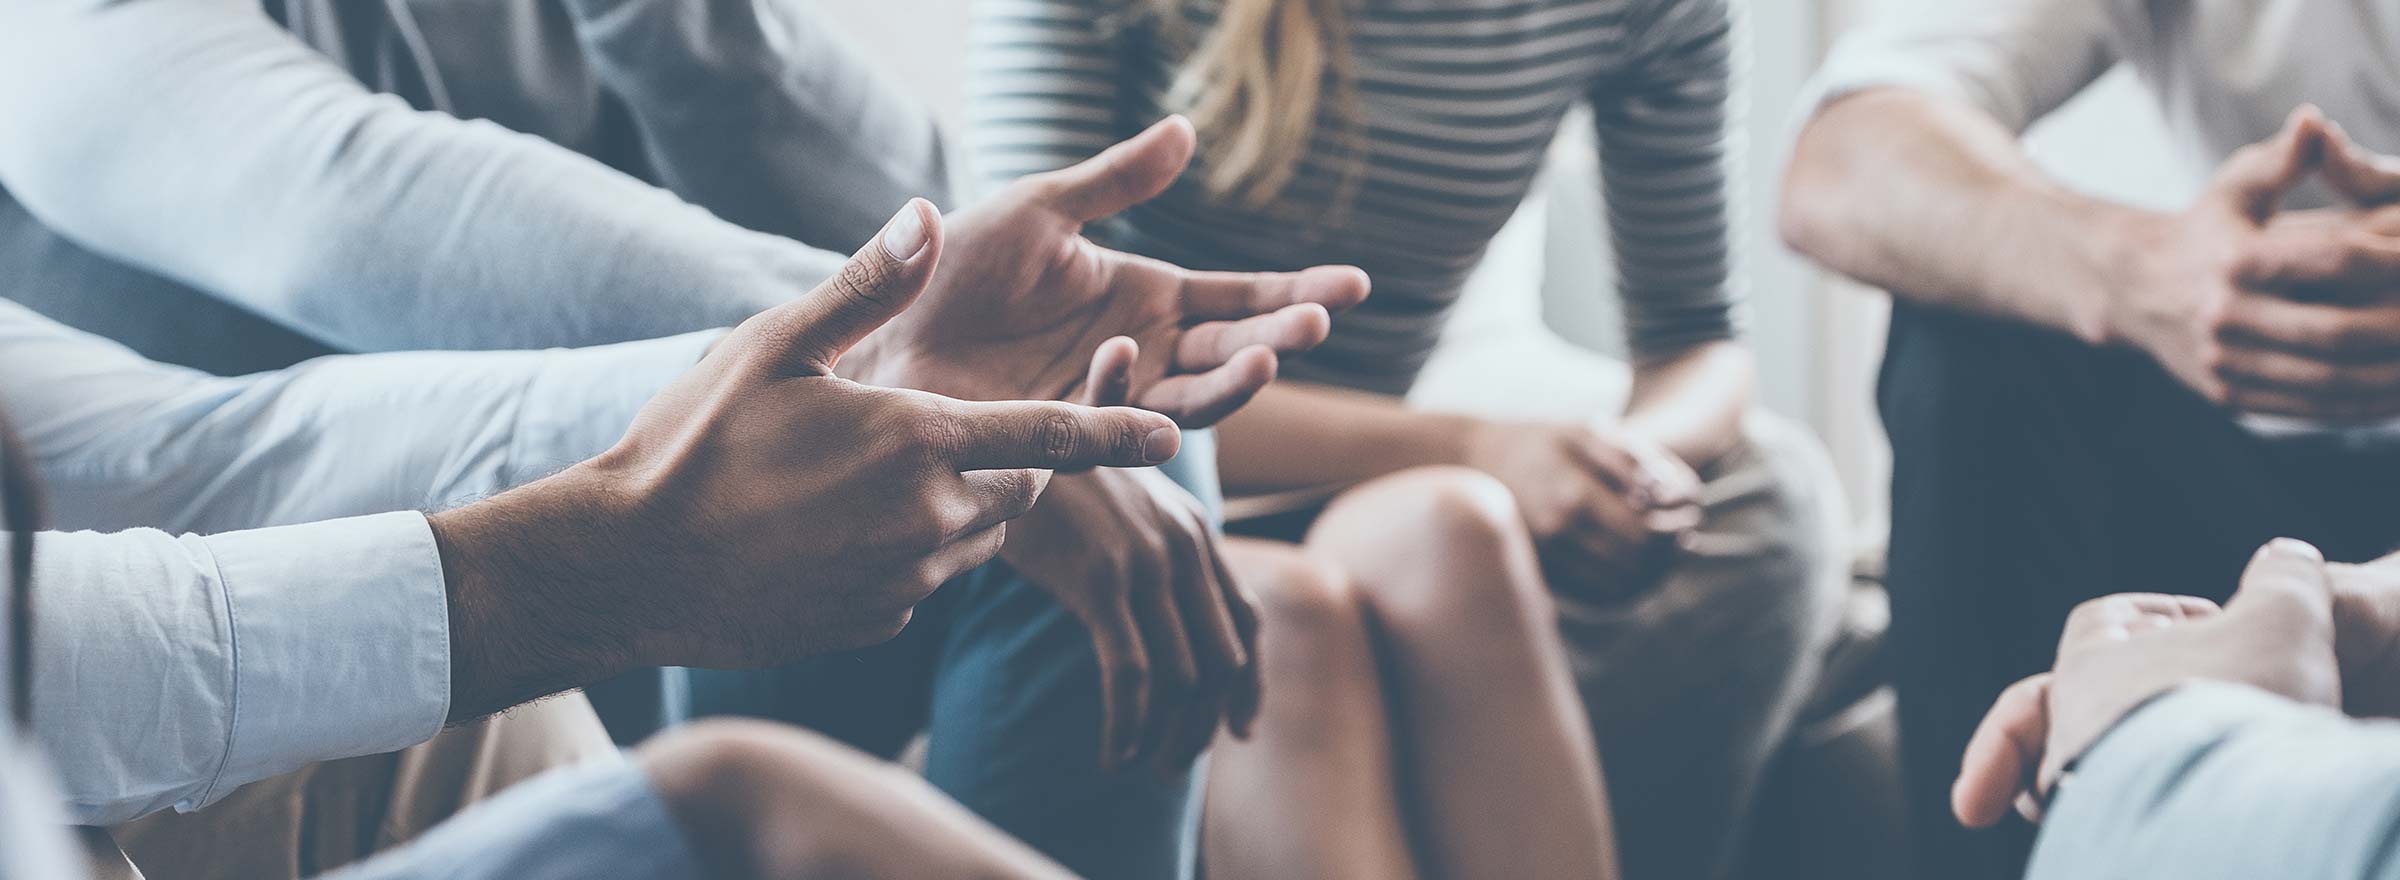 hands of people sitting in a tight group